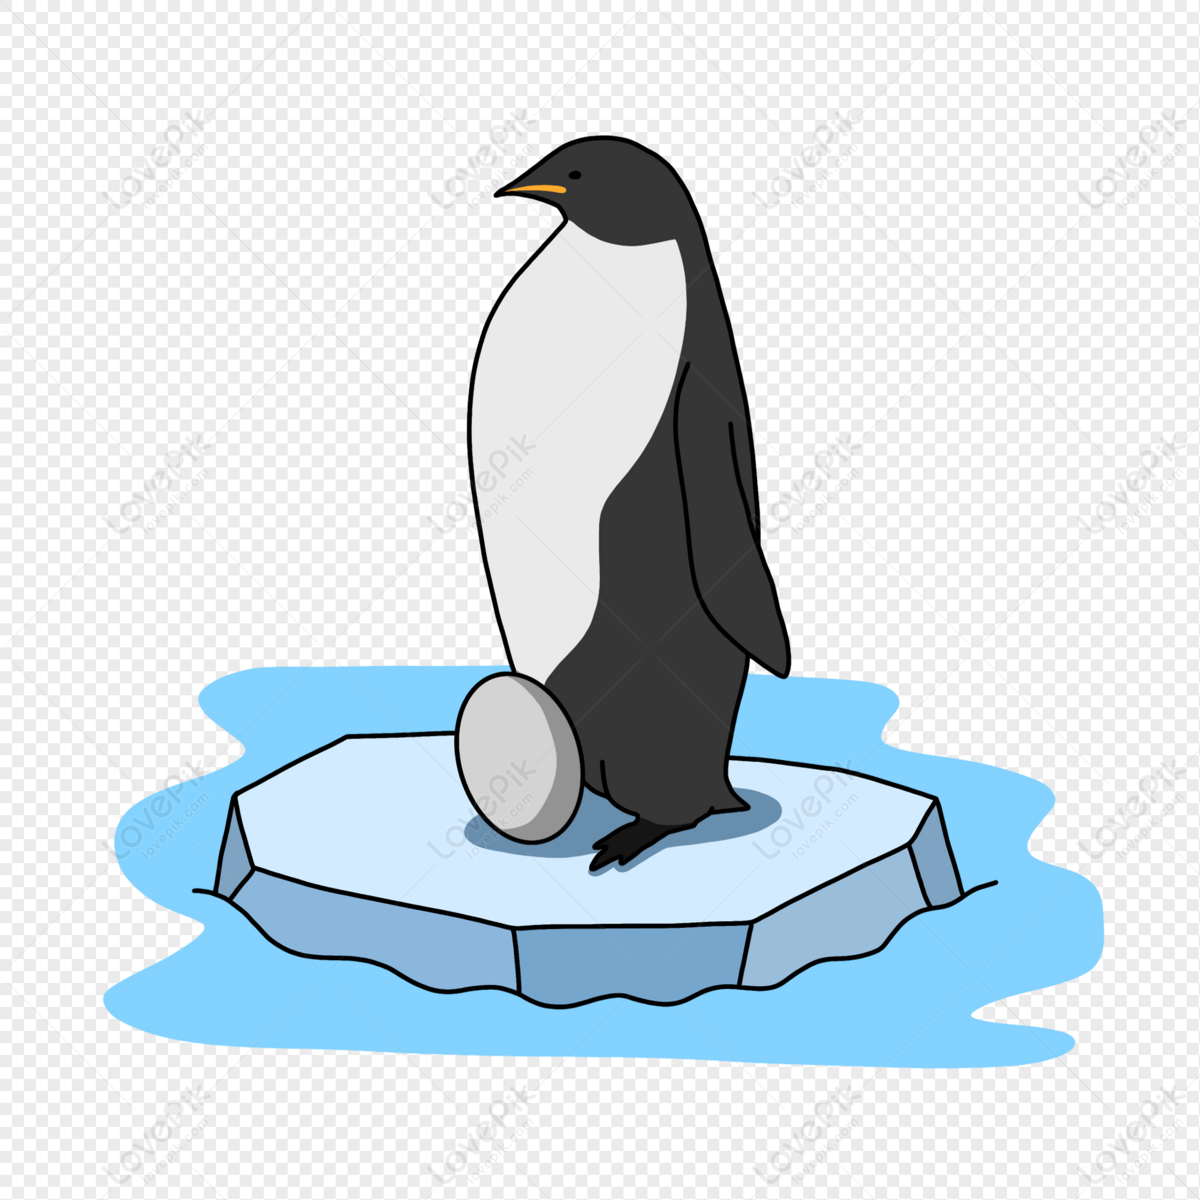 Cartoon Penguin Hatching Egg PNG Transparent Background And Clipart Image  For Free Download - Lovepik | 401456850